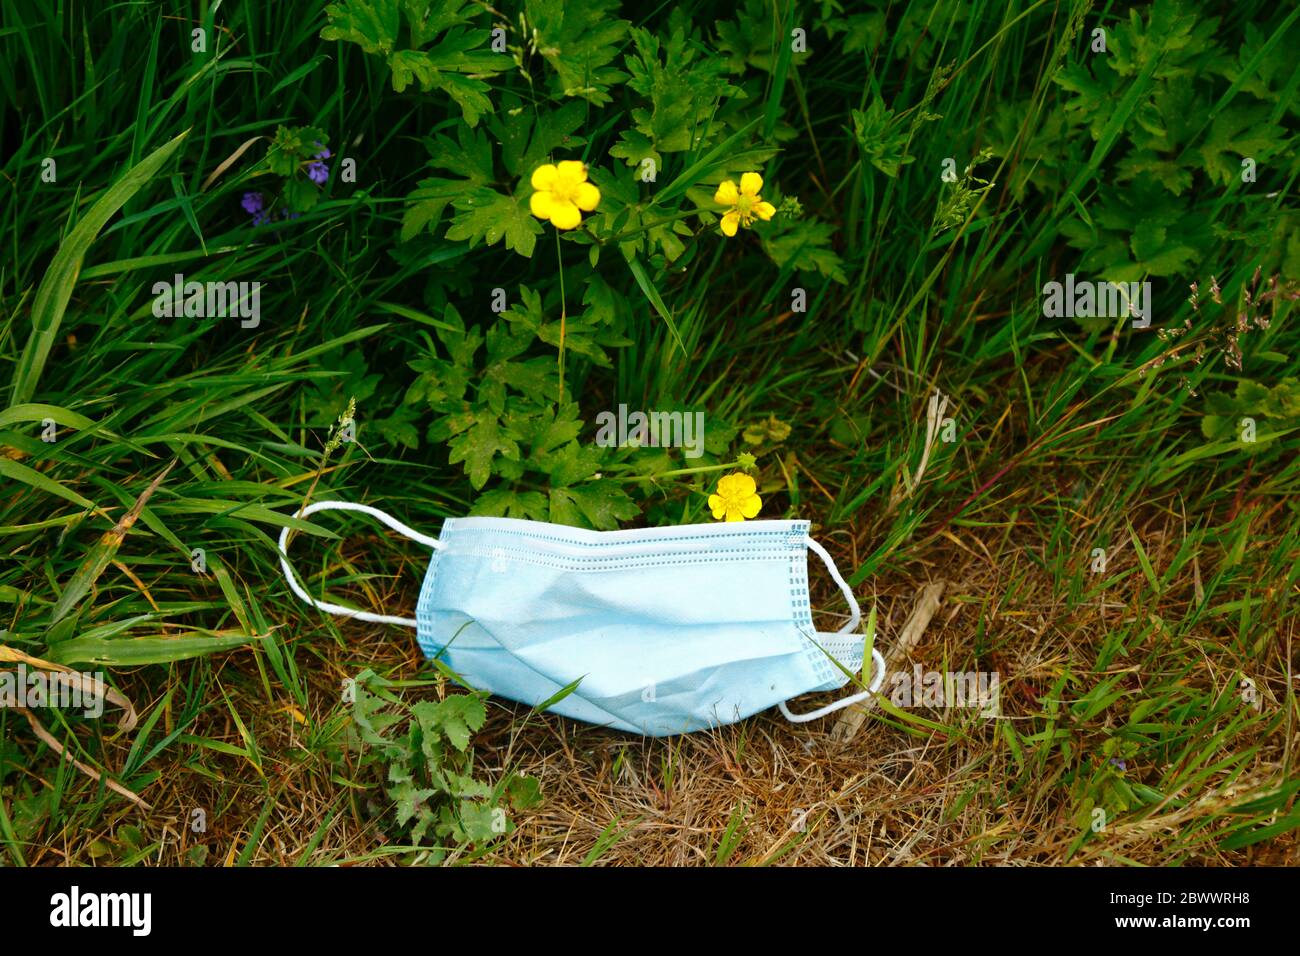 2nd June 2020, near Tonbridge, Kent, UK: Discarded face mask in wildflowers next to hedgerow alongside a country lane, likely thrown from a passing vehicle or cyclist. The yellow flowers are creeping buttercup (Ranunculus repens) Stock Photo